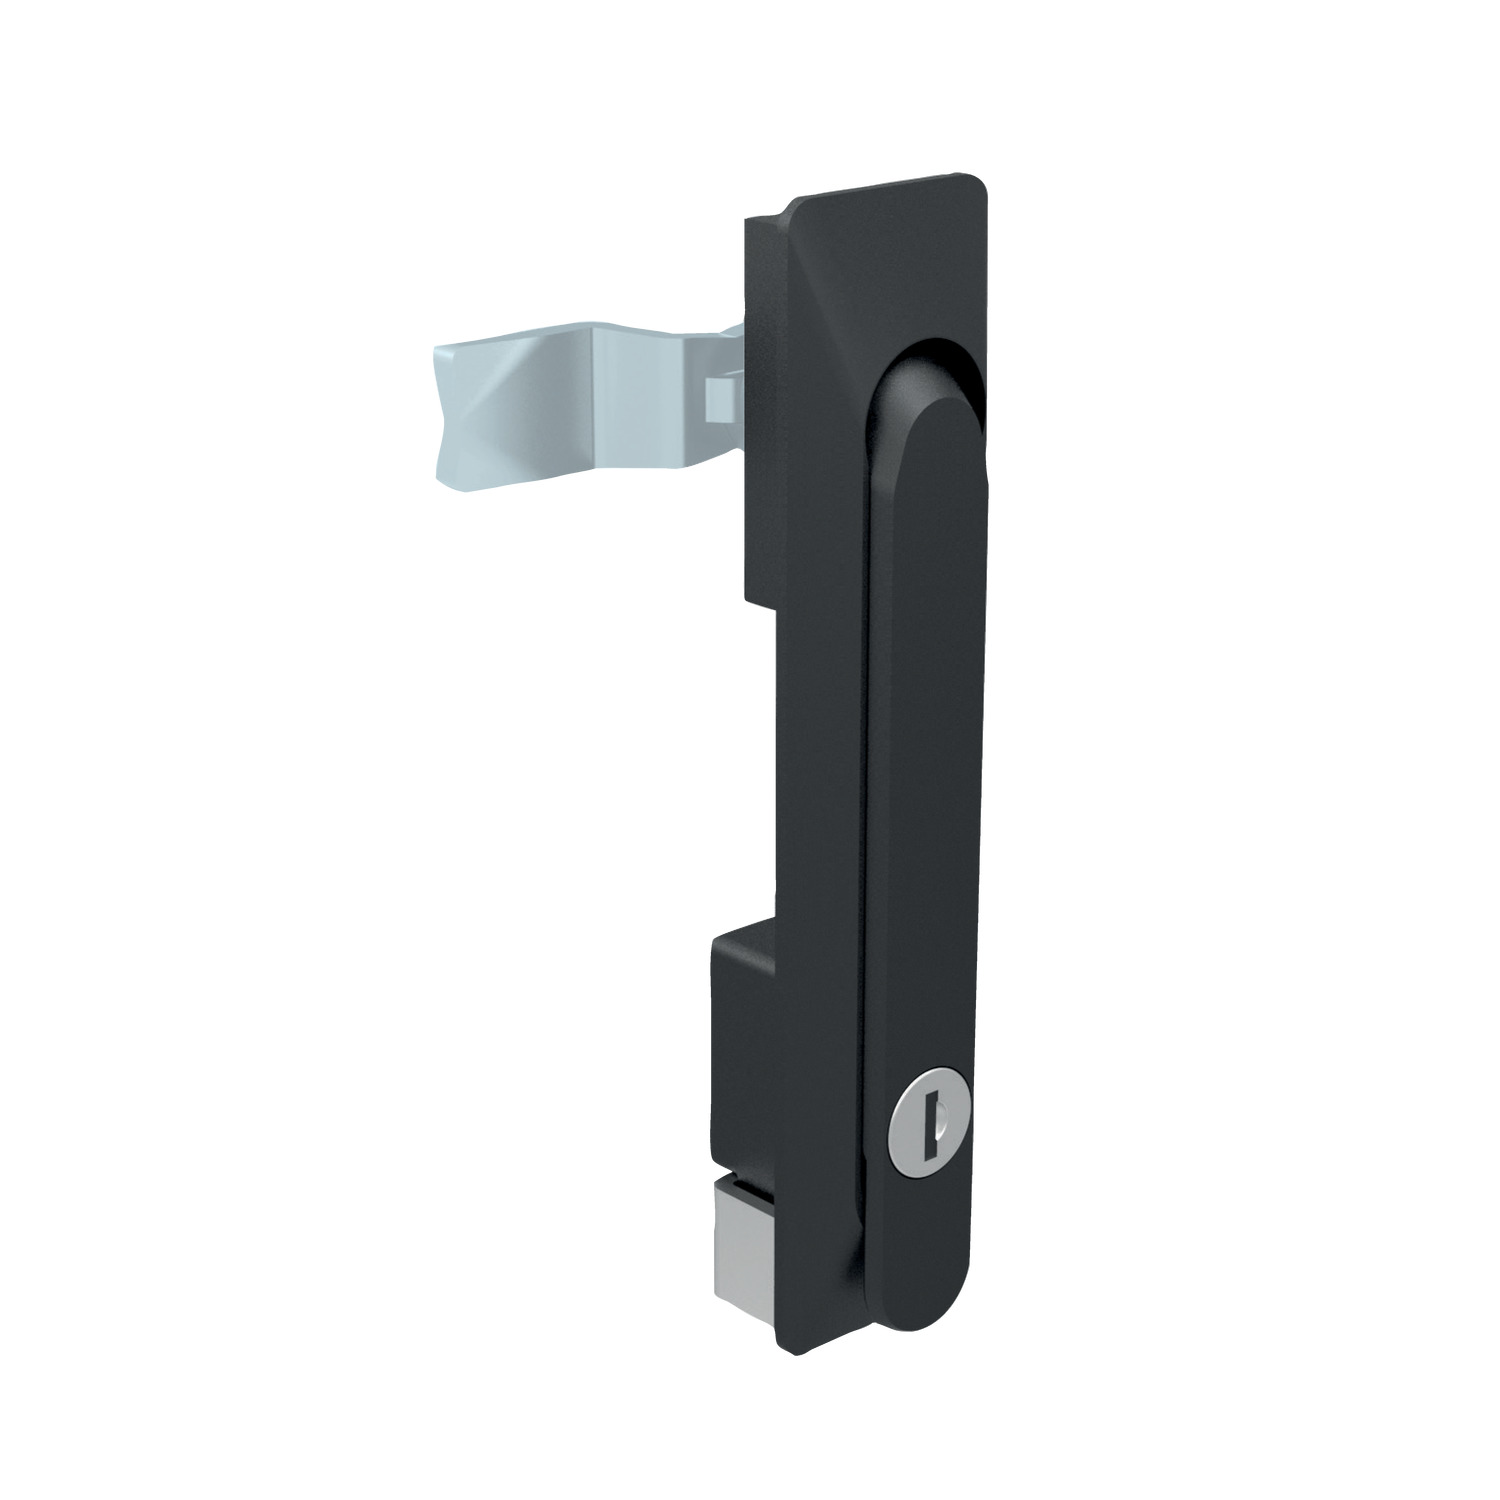 Swing Handles - Cam Control For attractive easy functional opening for telecom and data cabinets as well as other industrial enclosures. Lock and handle in one attractive design.